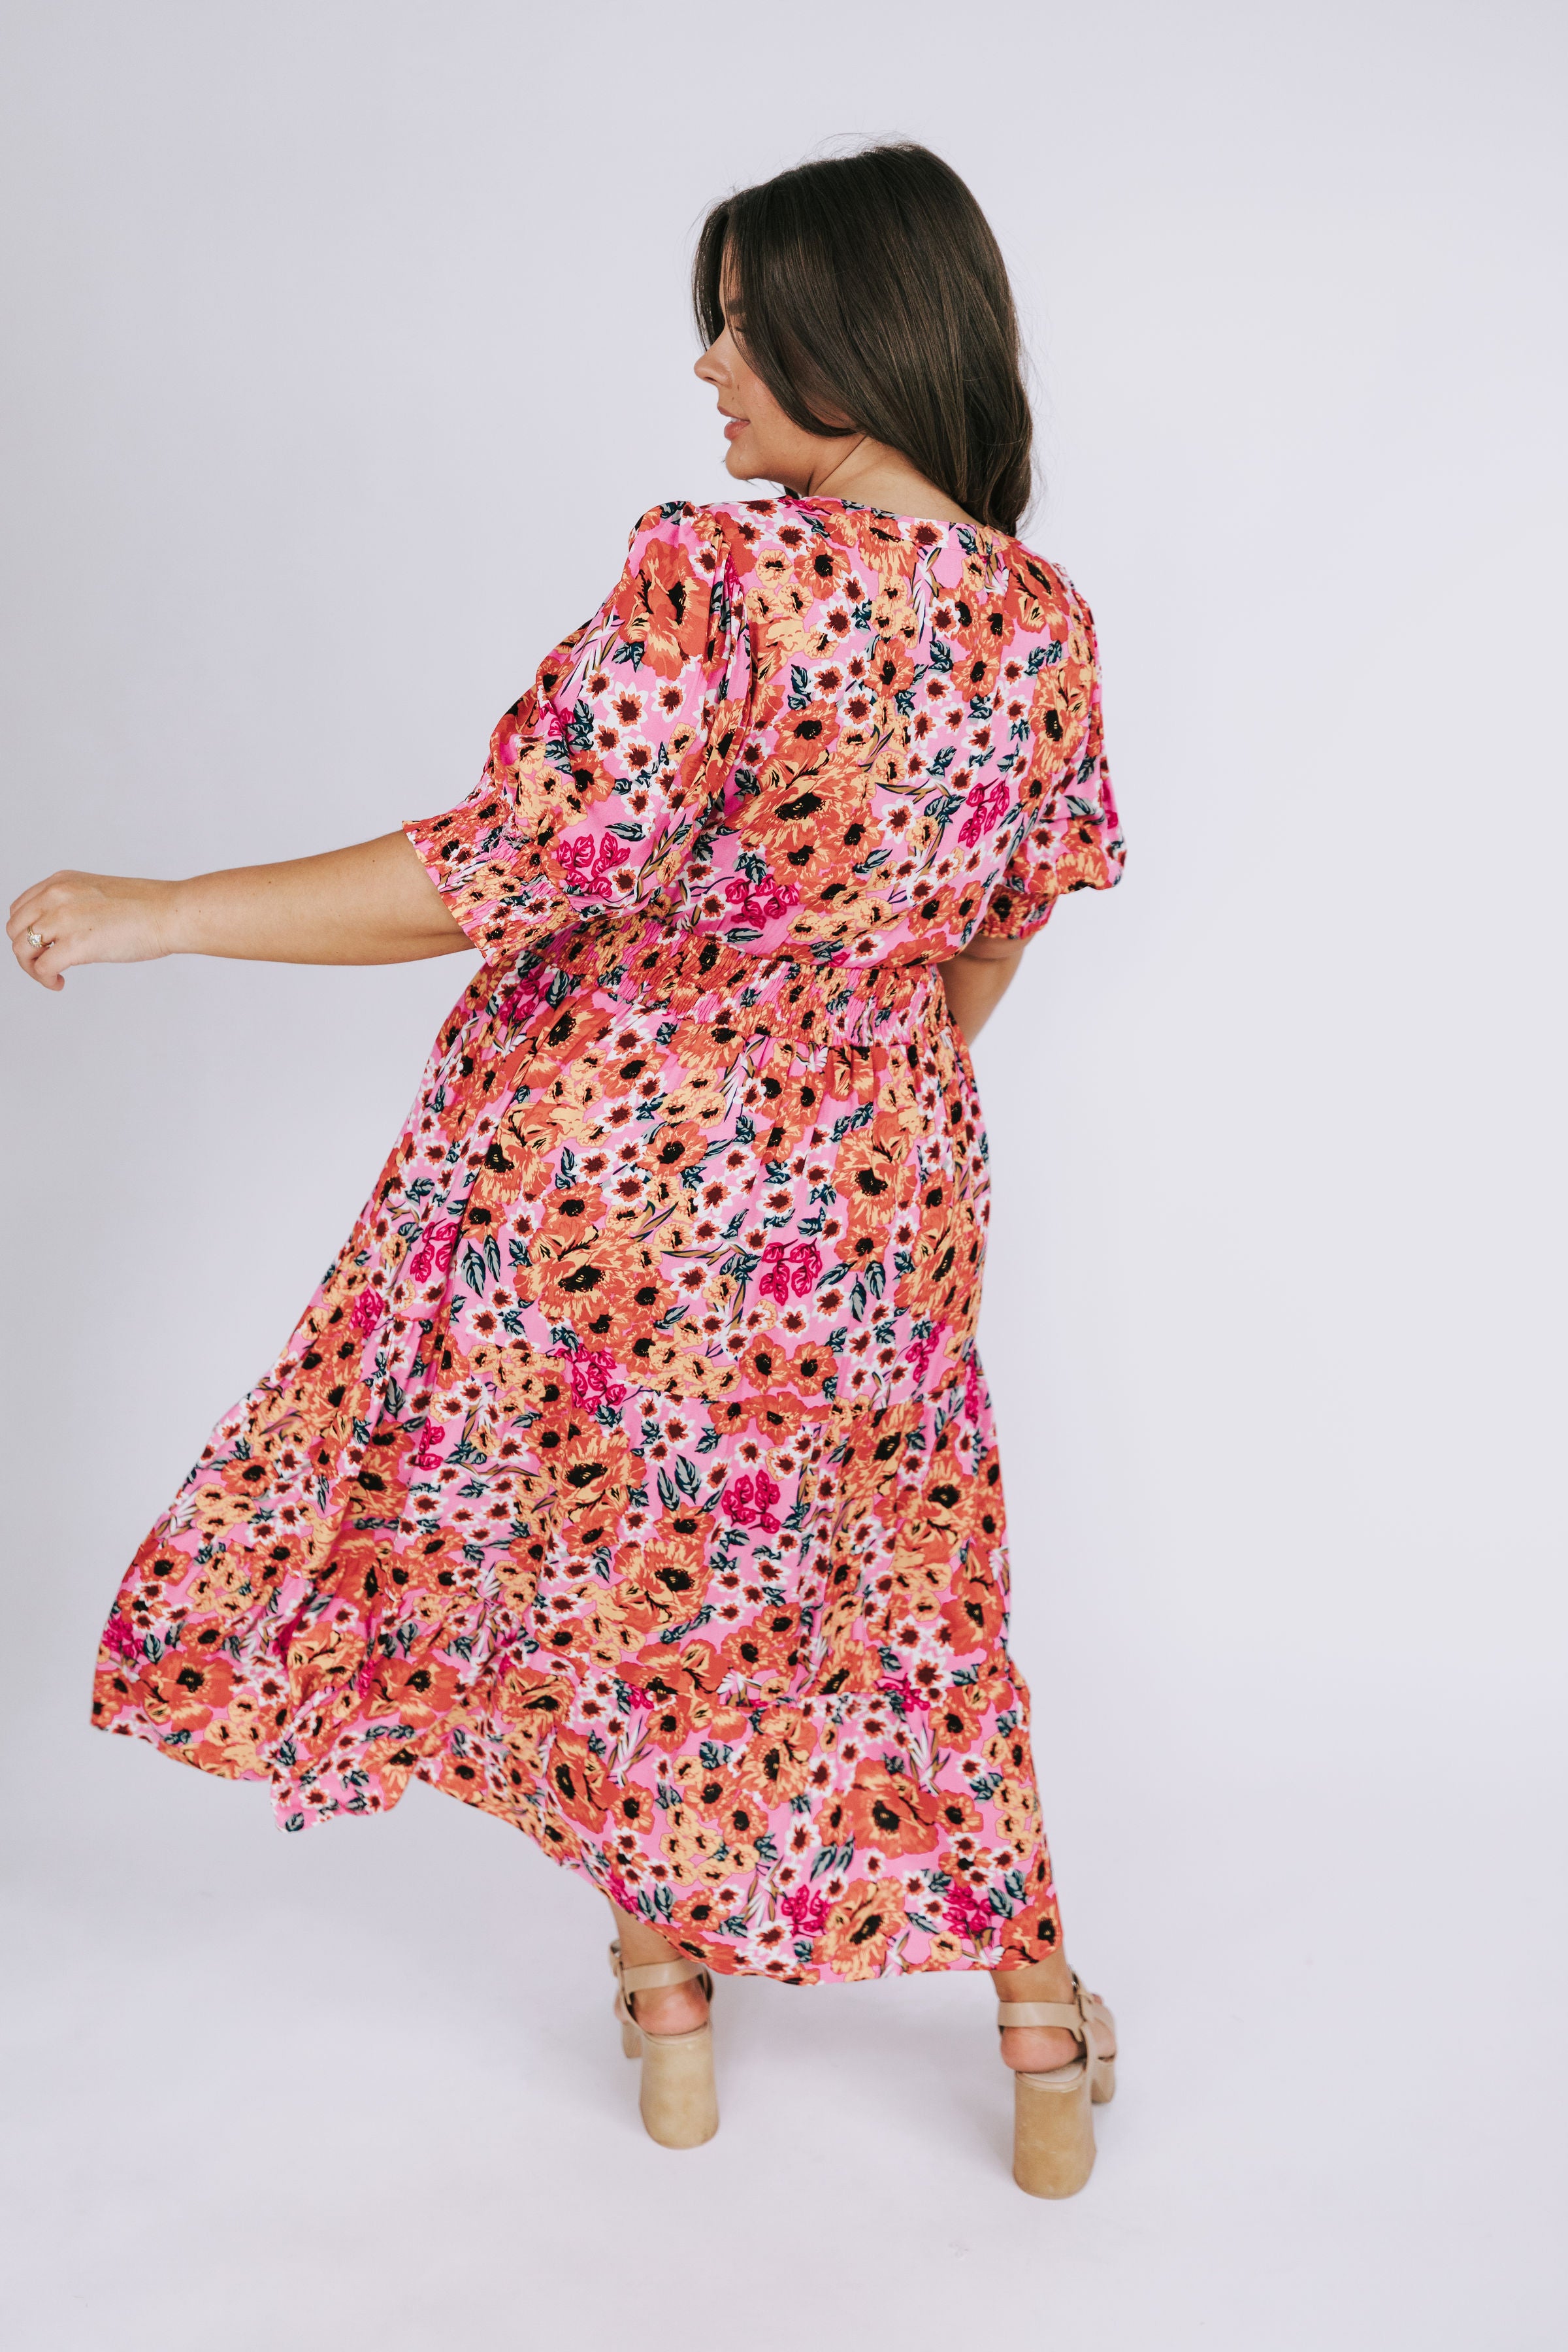 PLUS SIZE - On The Wild Side Dress